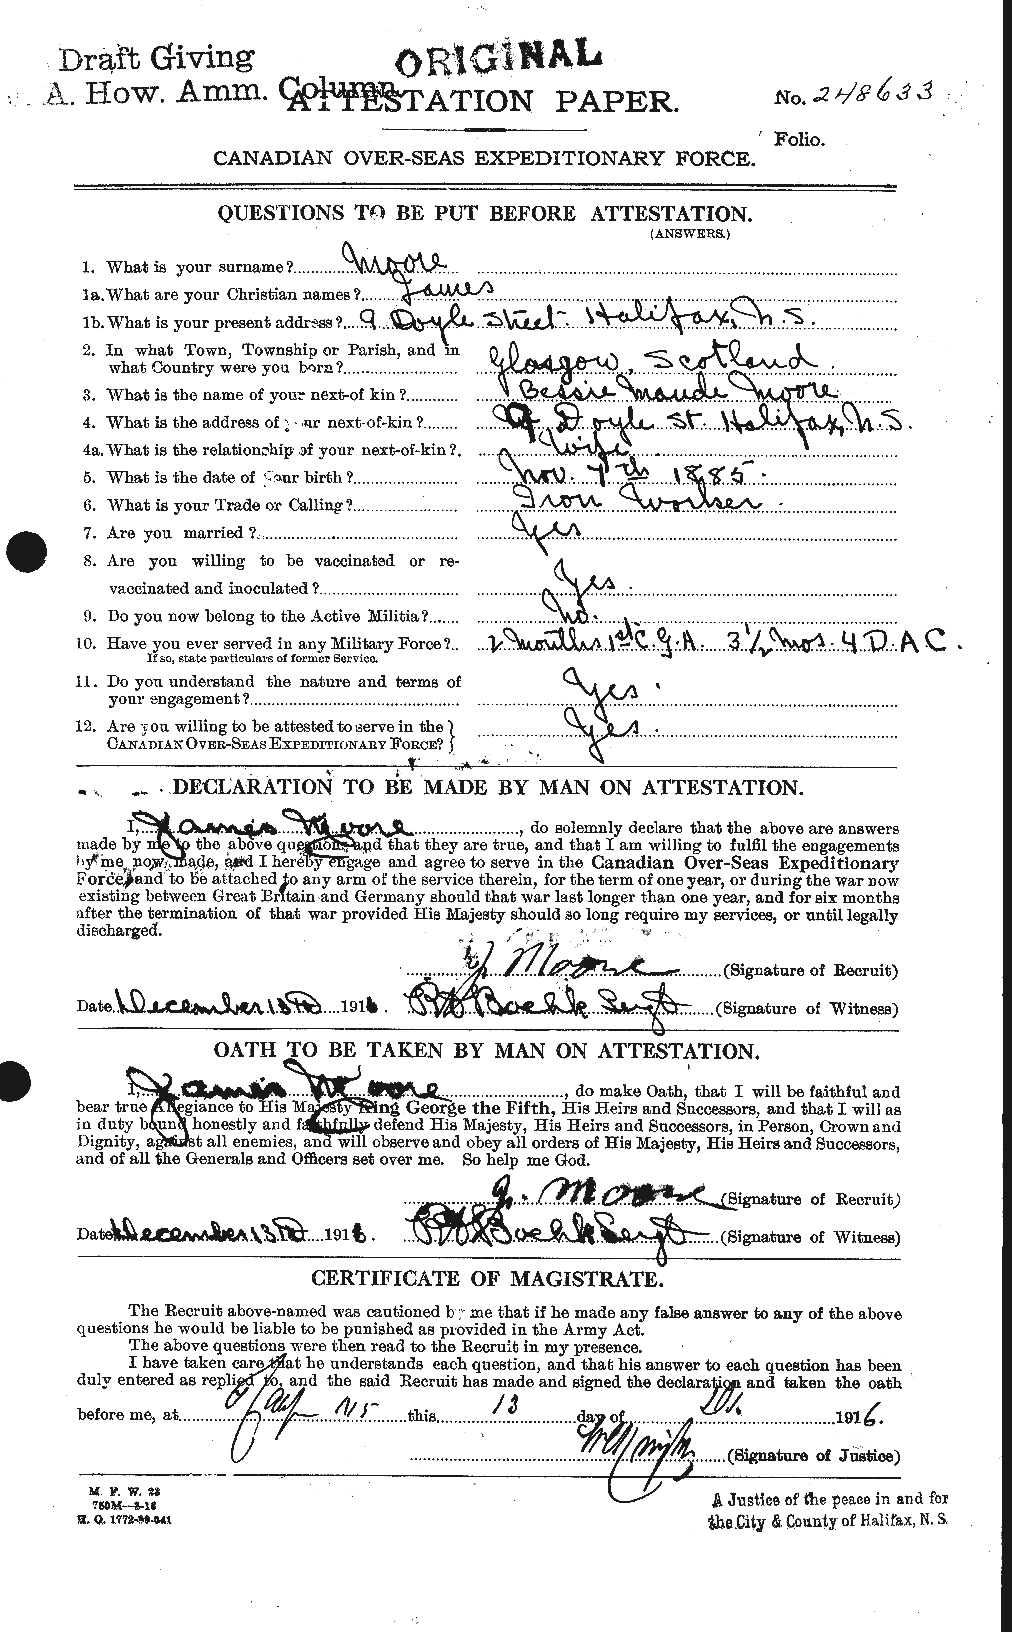 Personnel Records of the First World War - CEF 502174a